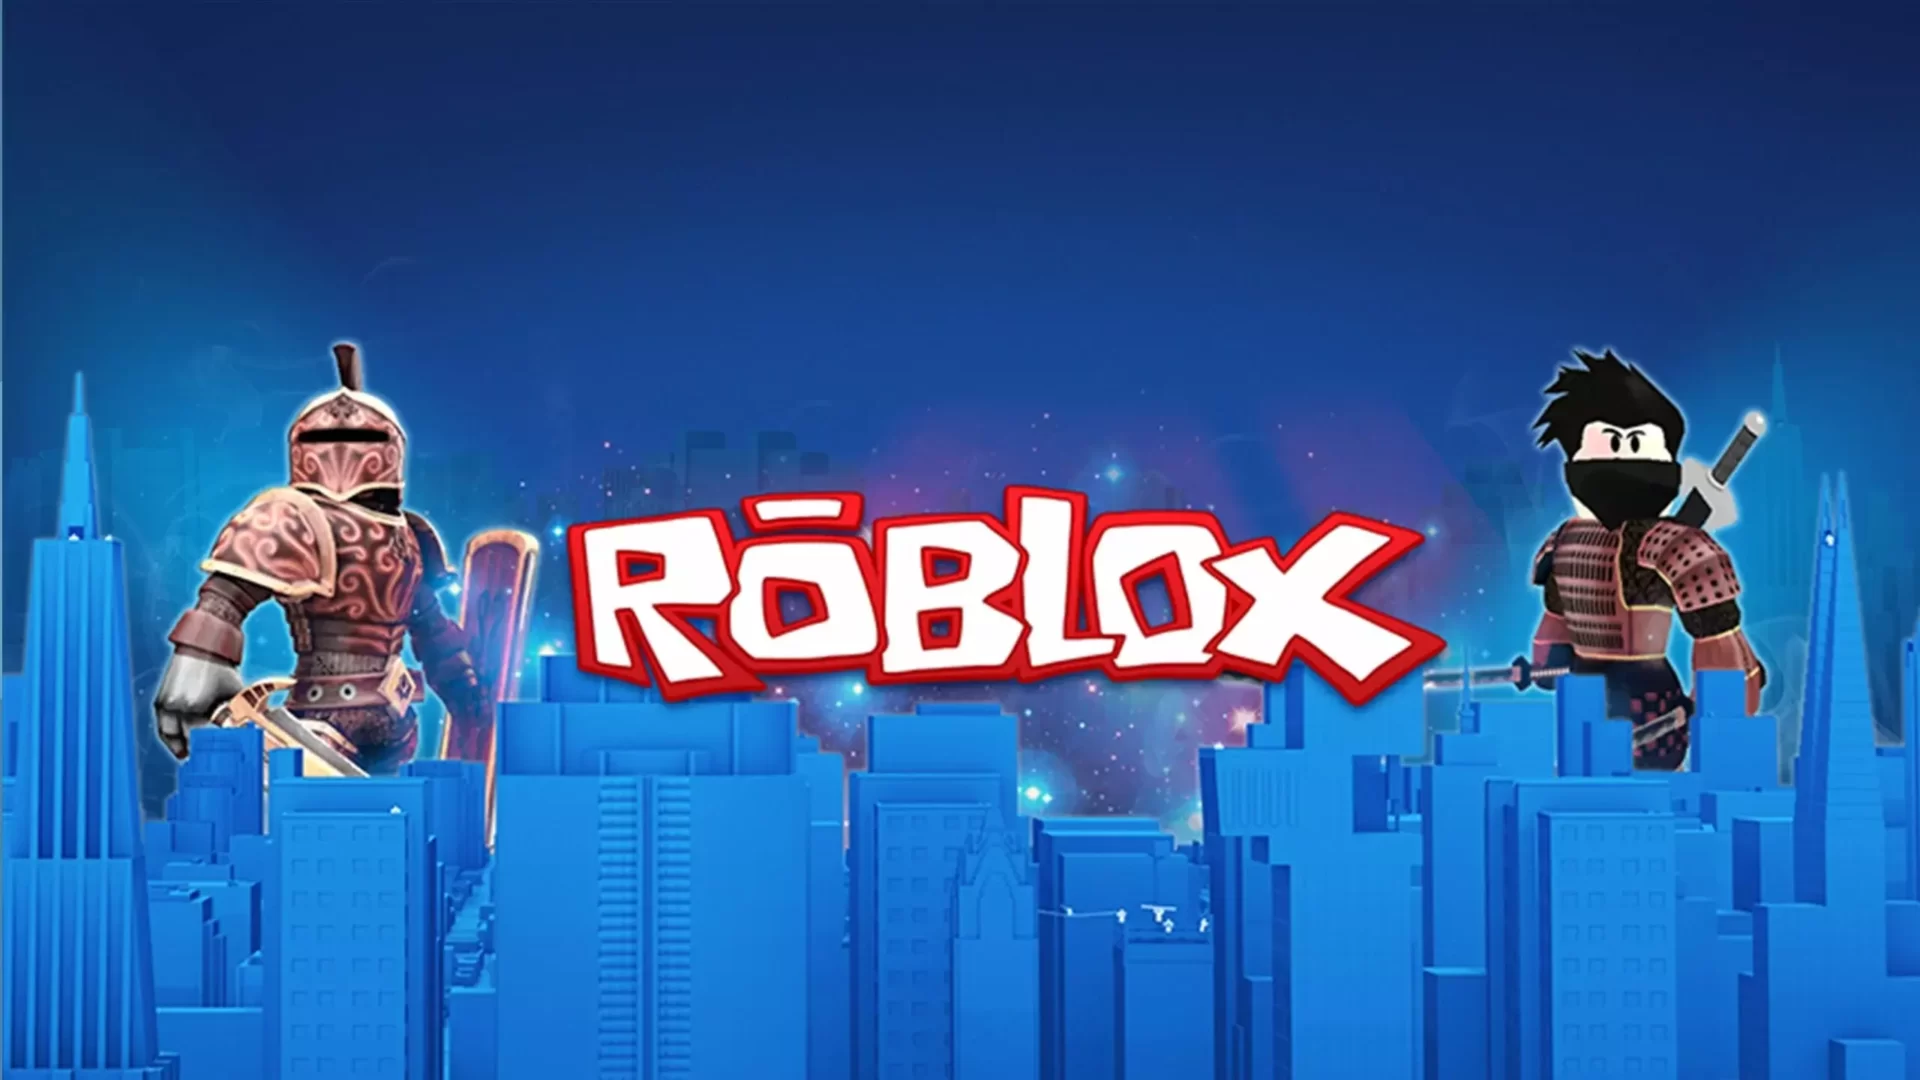 Is Roblox Safe to Play Right Now